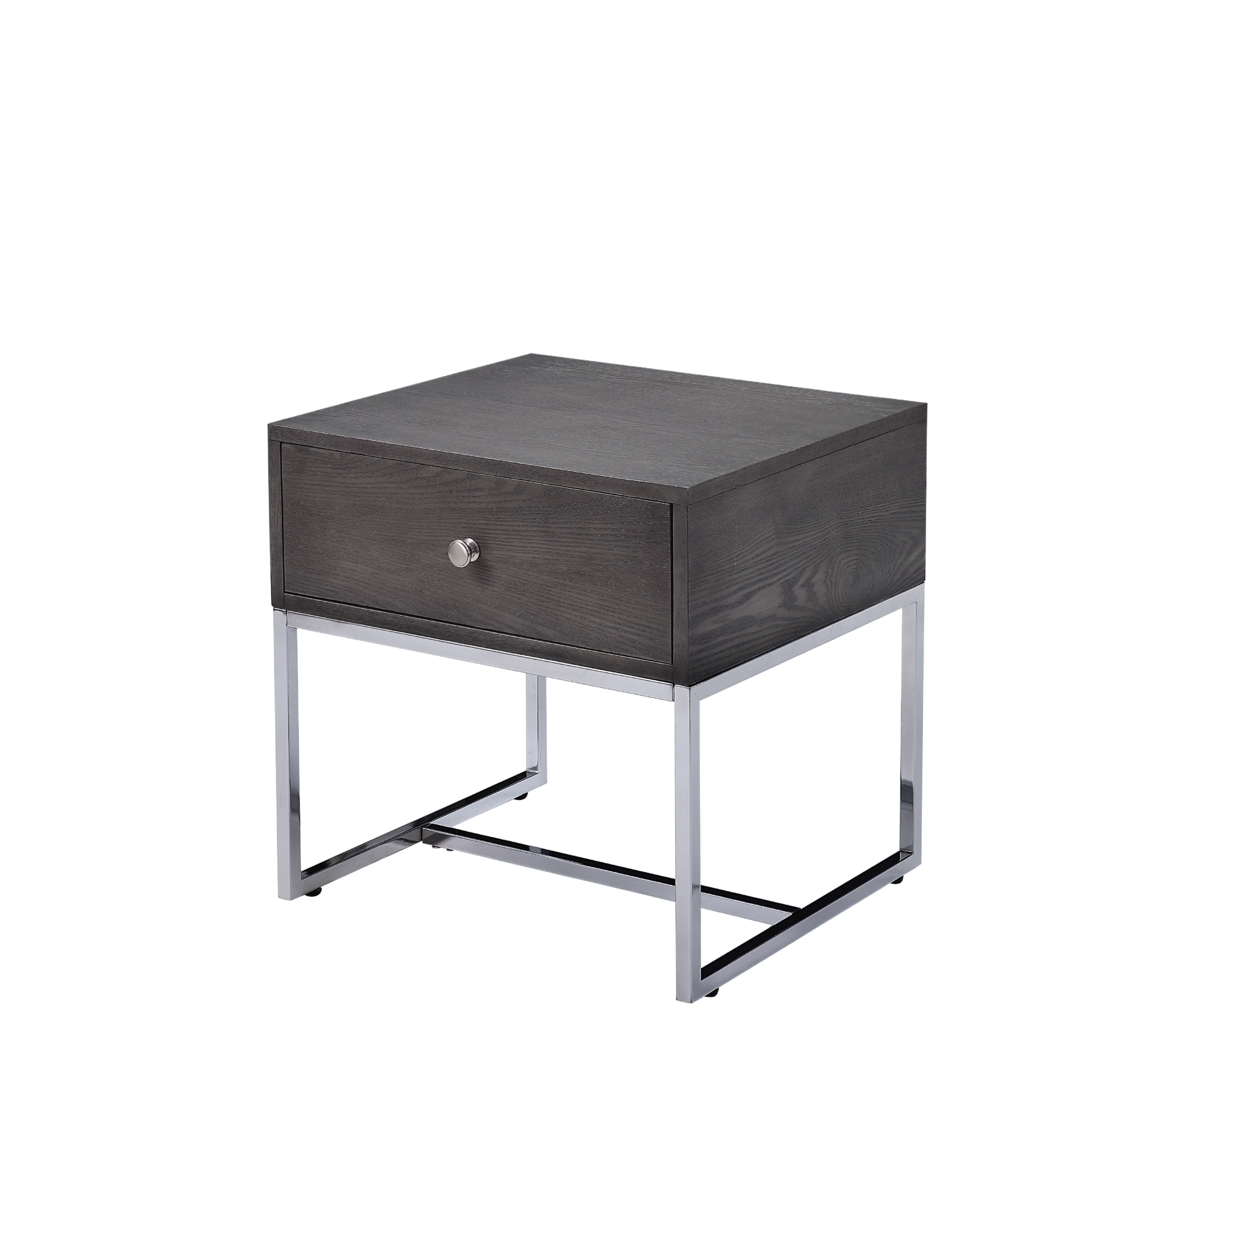 Wooden End Table With Tubular Metal Base And Spacious Drawer, Gray And Silver- Saltoro Sherpi